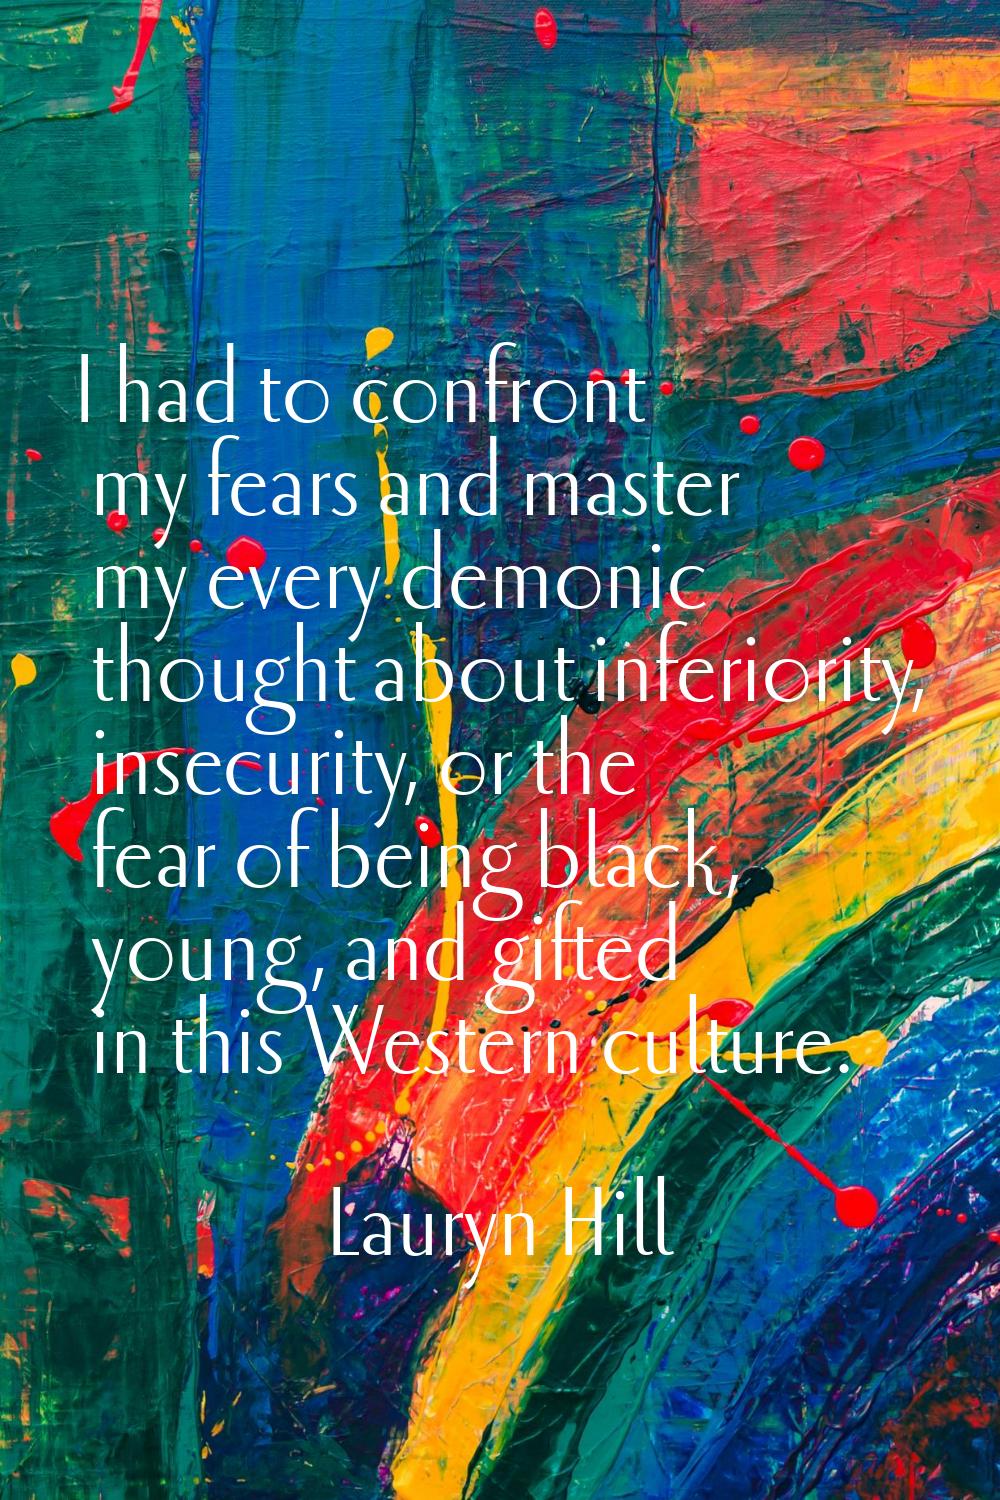 I had to confront my fears and master my every demonic thought about inferiority, insecurity, or th